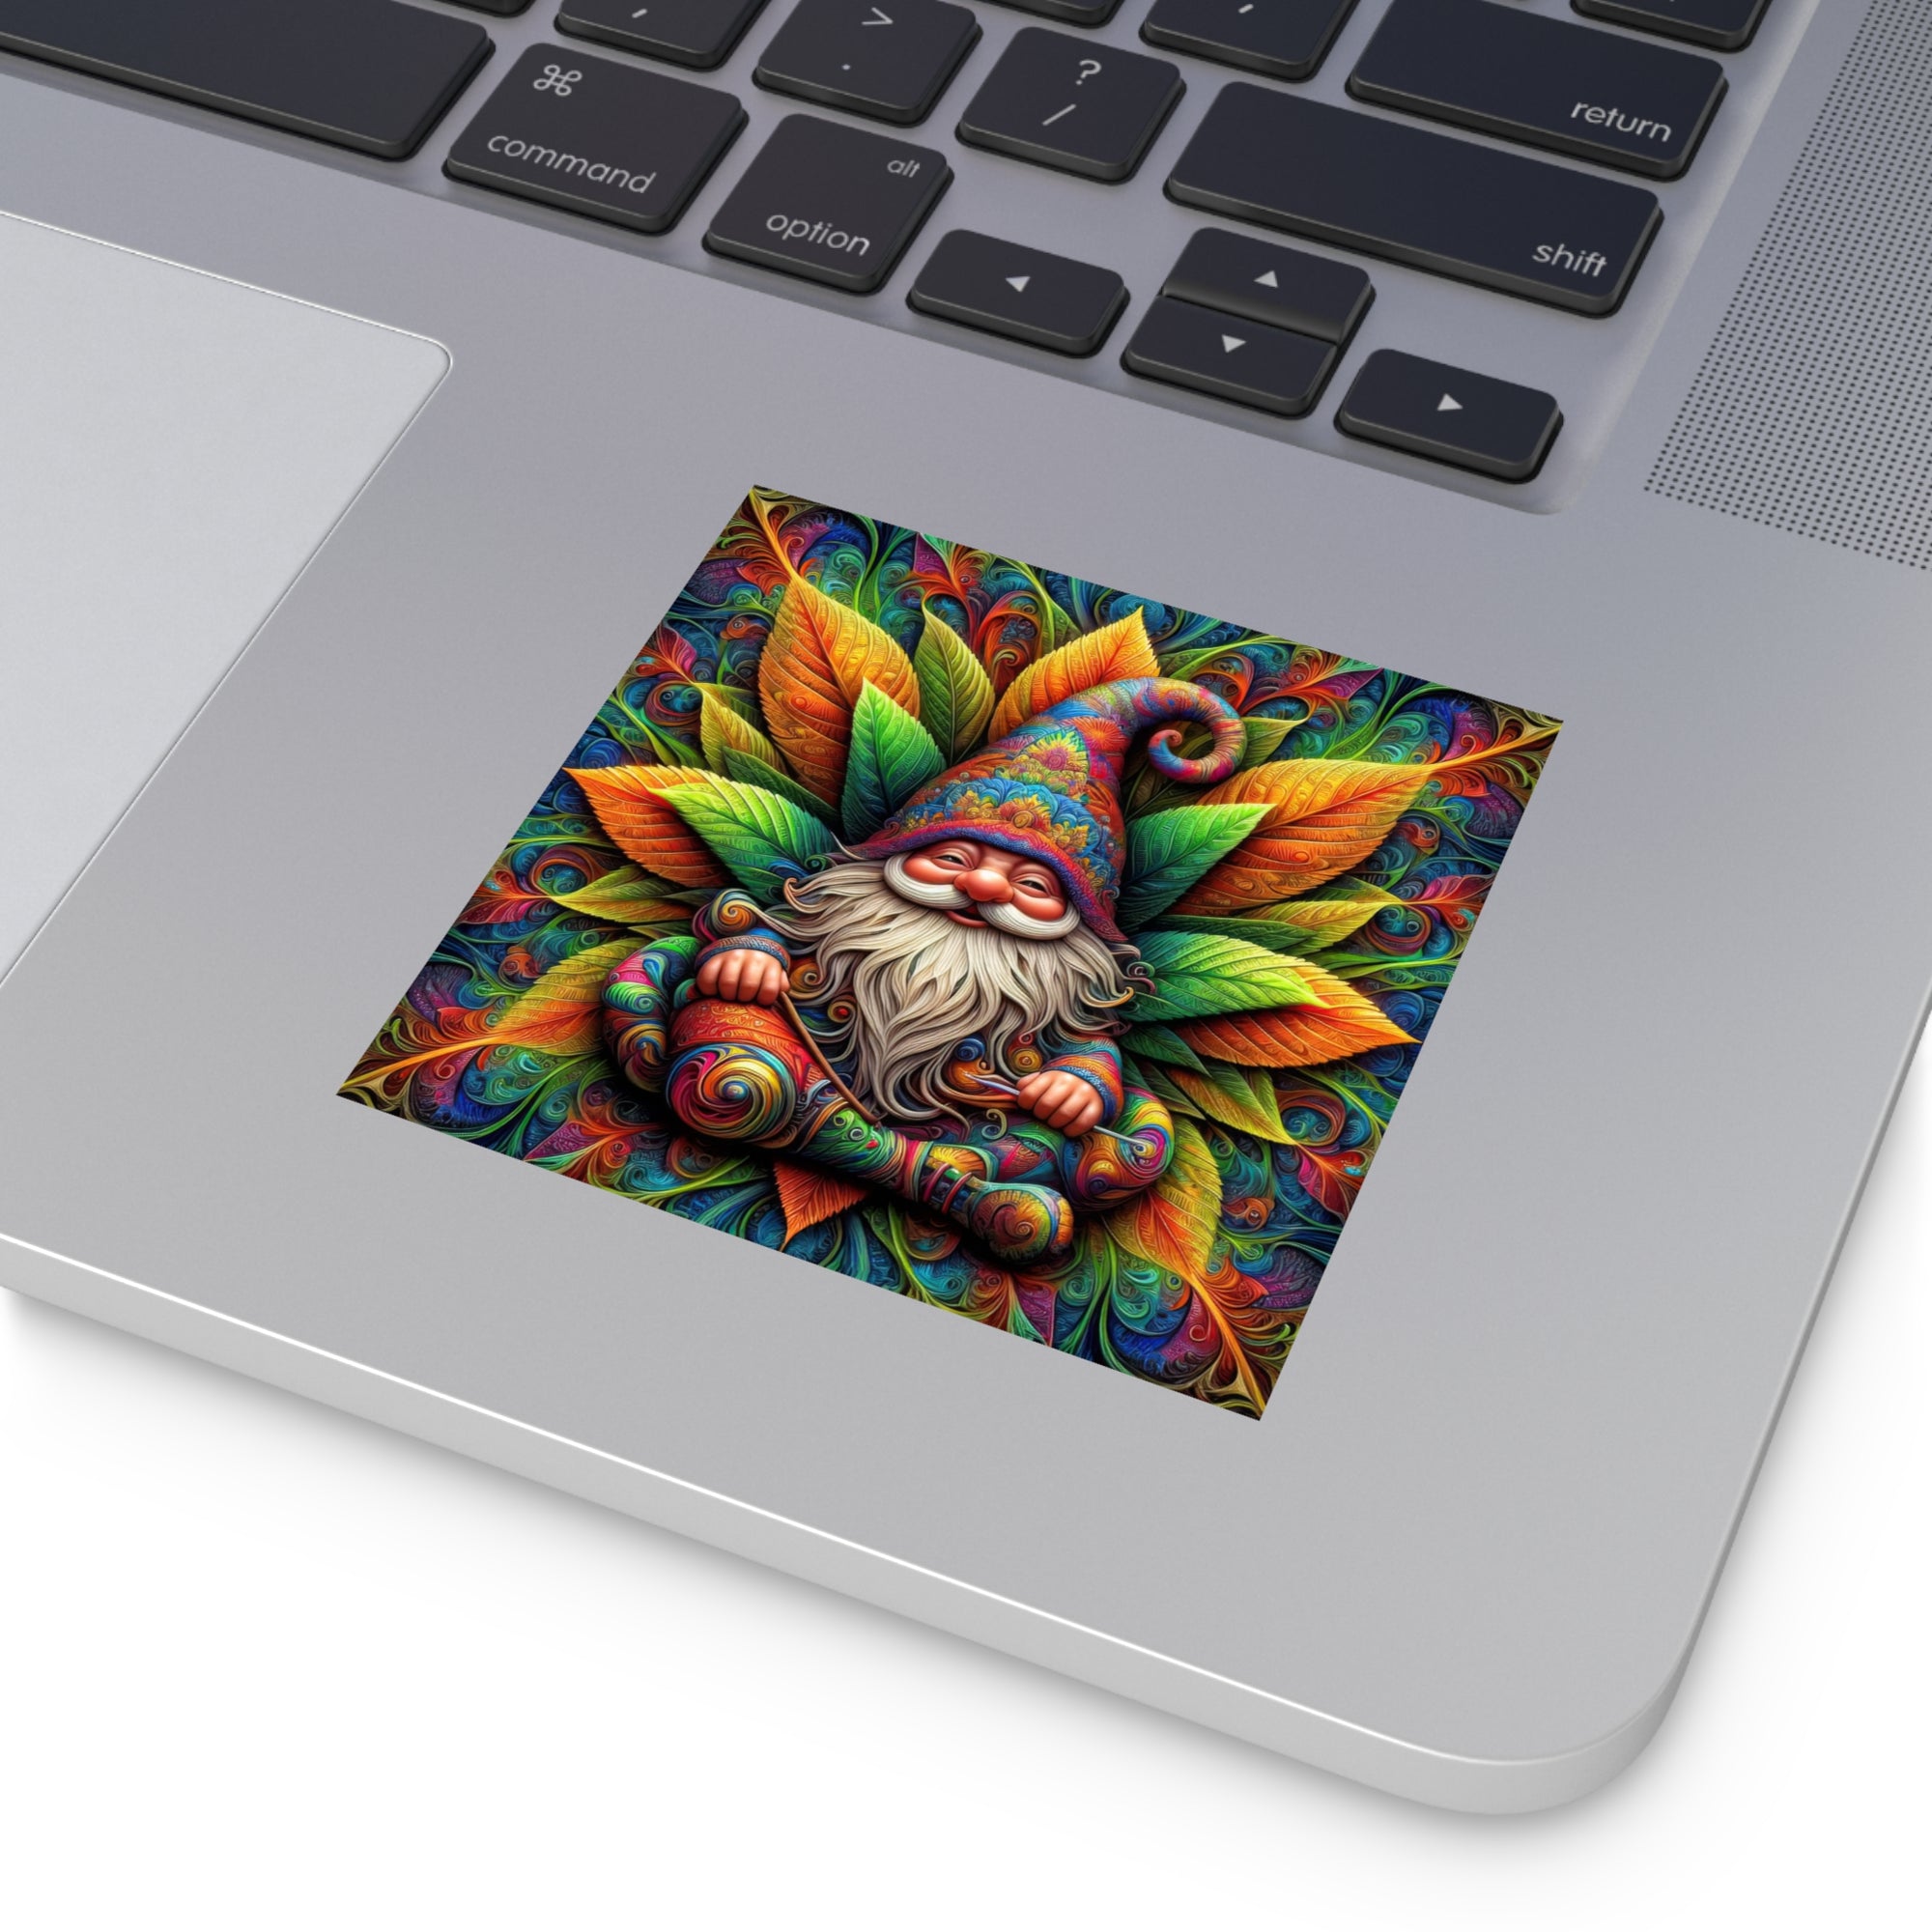 The Gnome's Whimsical Watch Vinyl Stickers